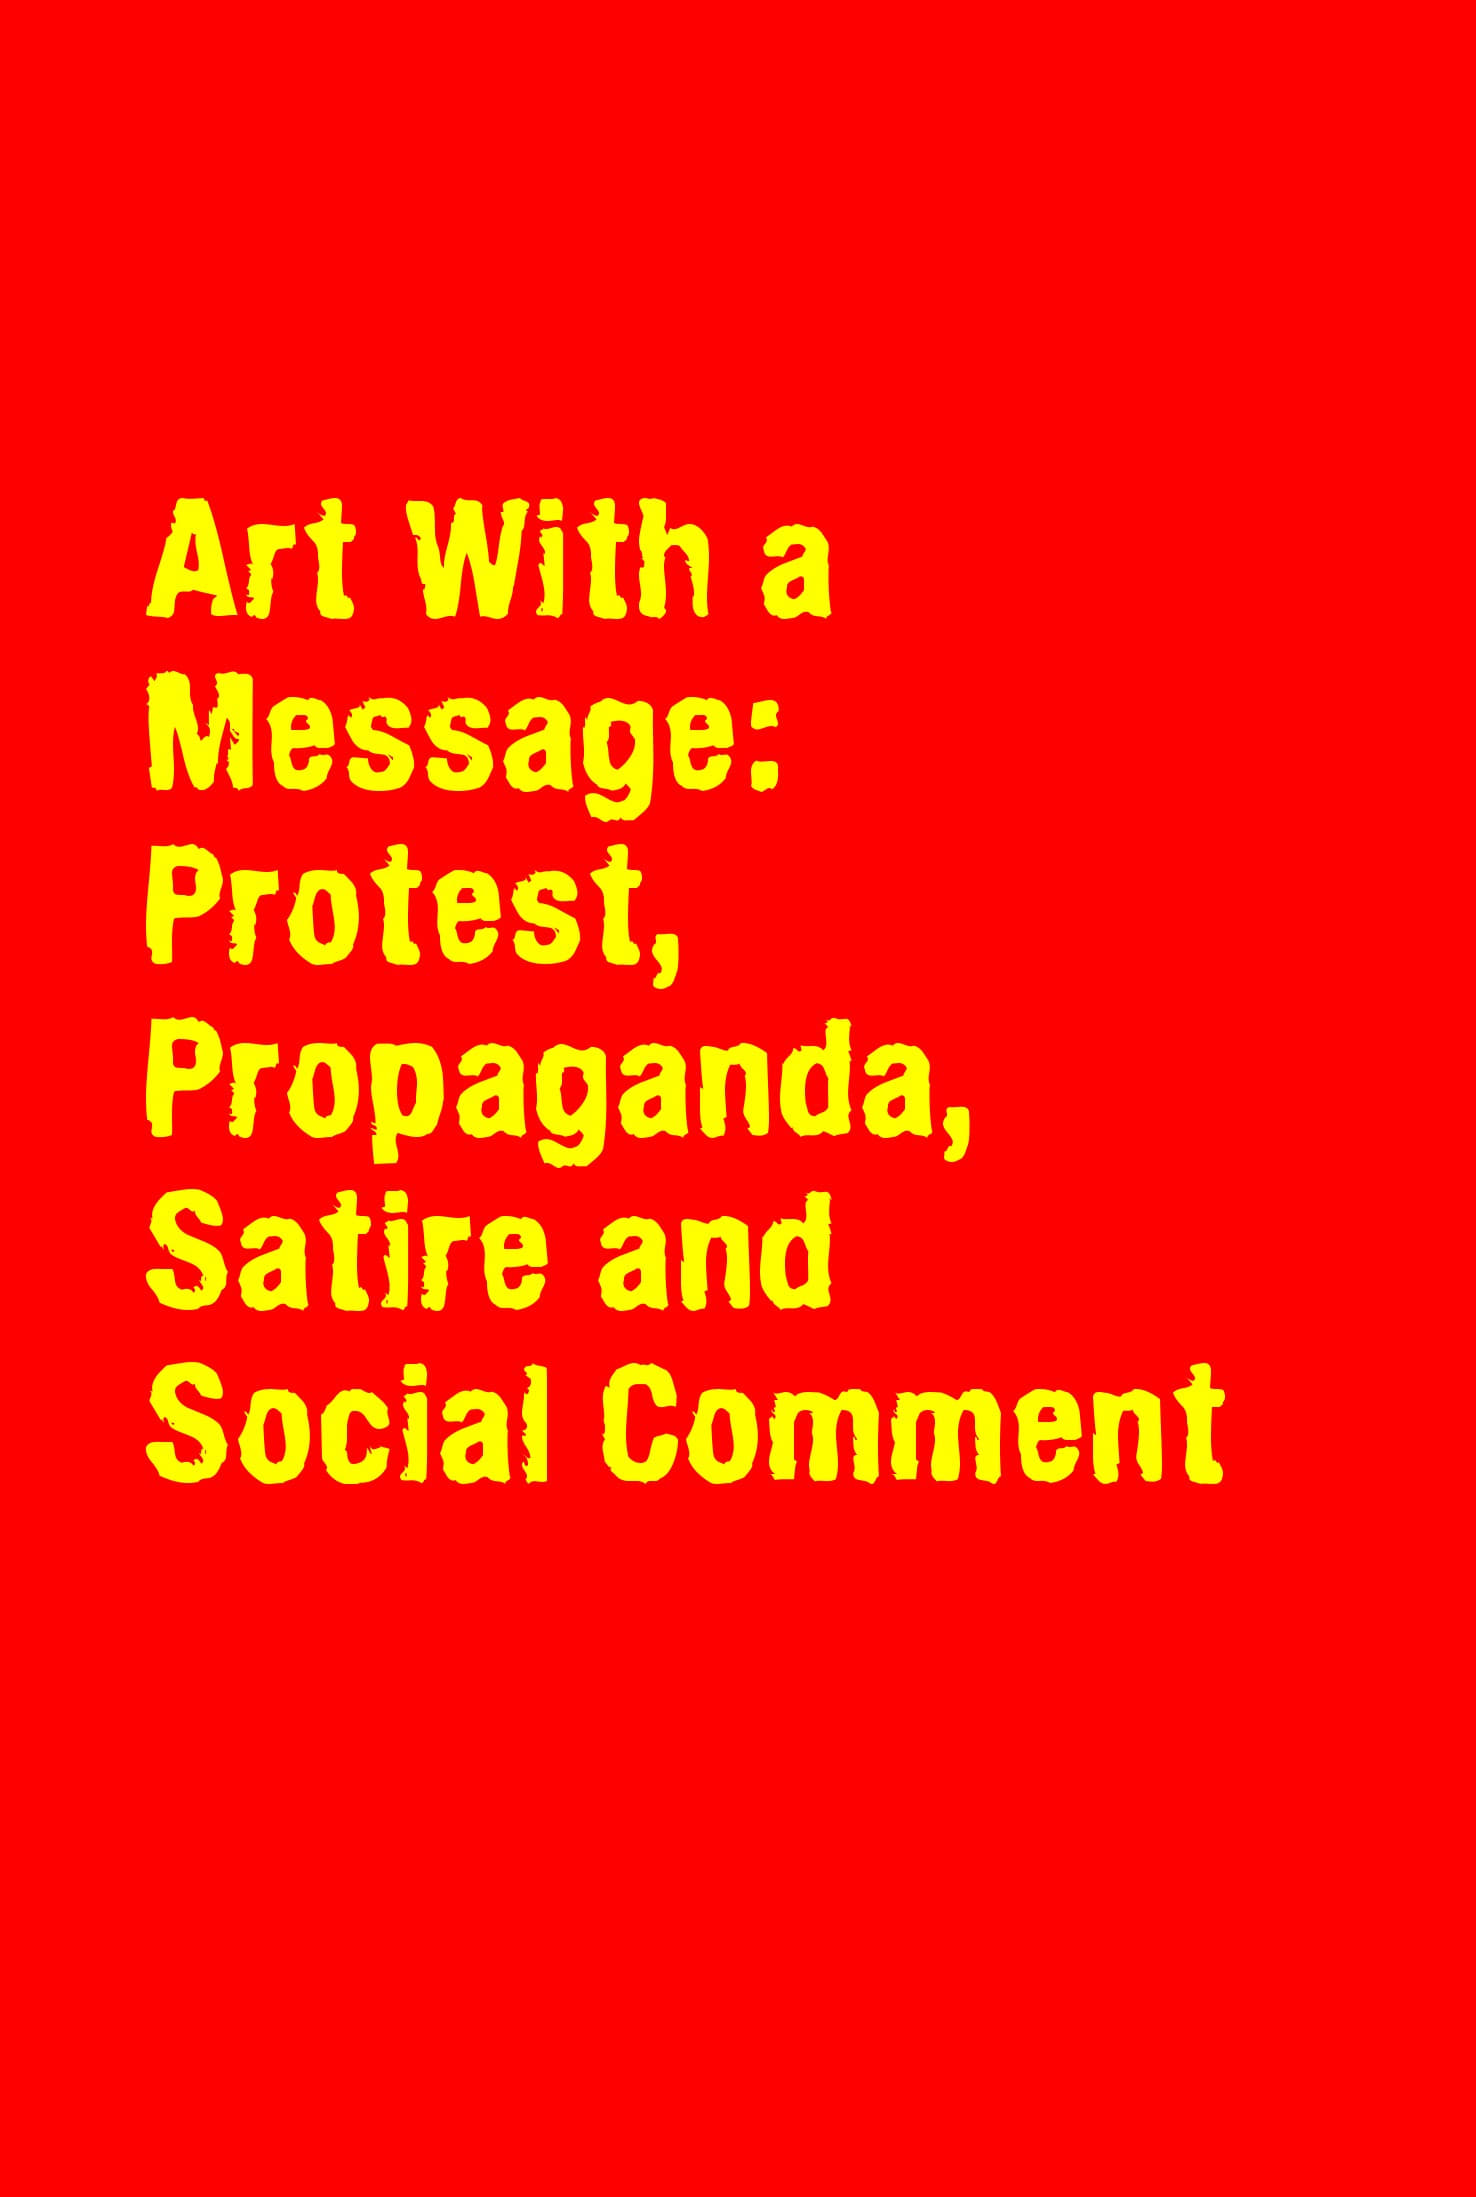 Art With a Message: Protest, Propaganda, Satire and Social Comment